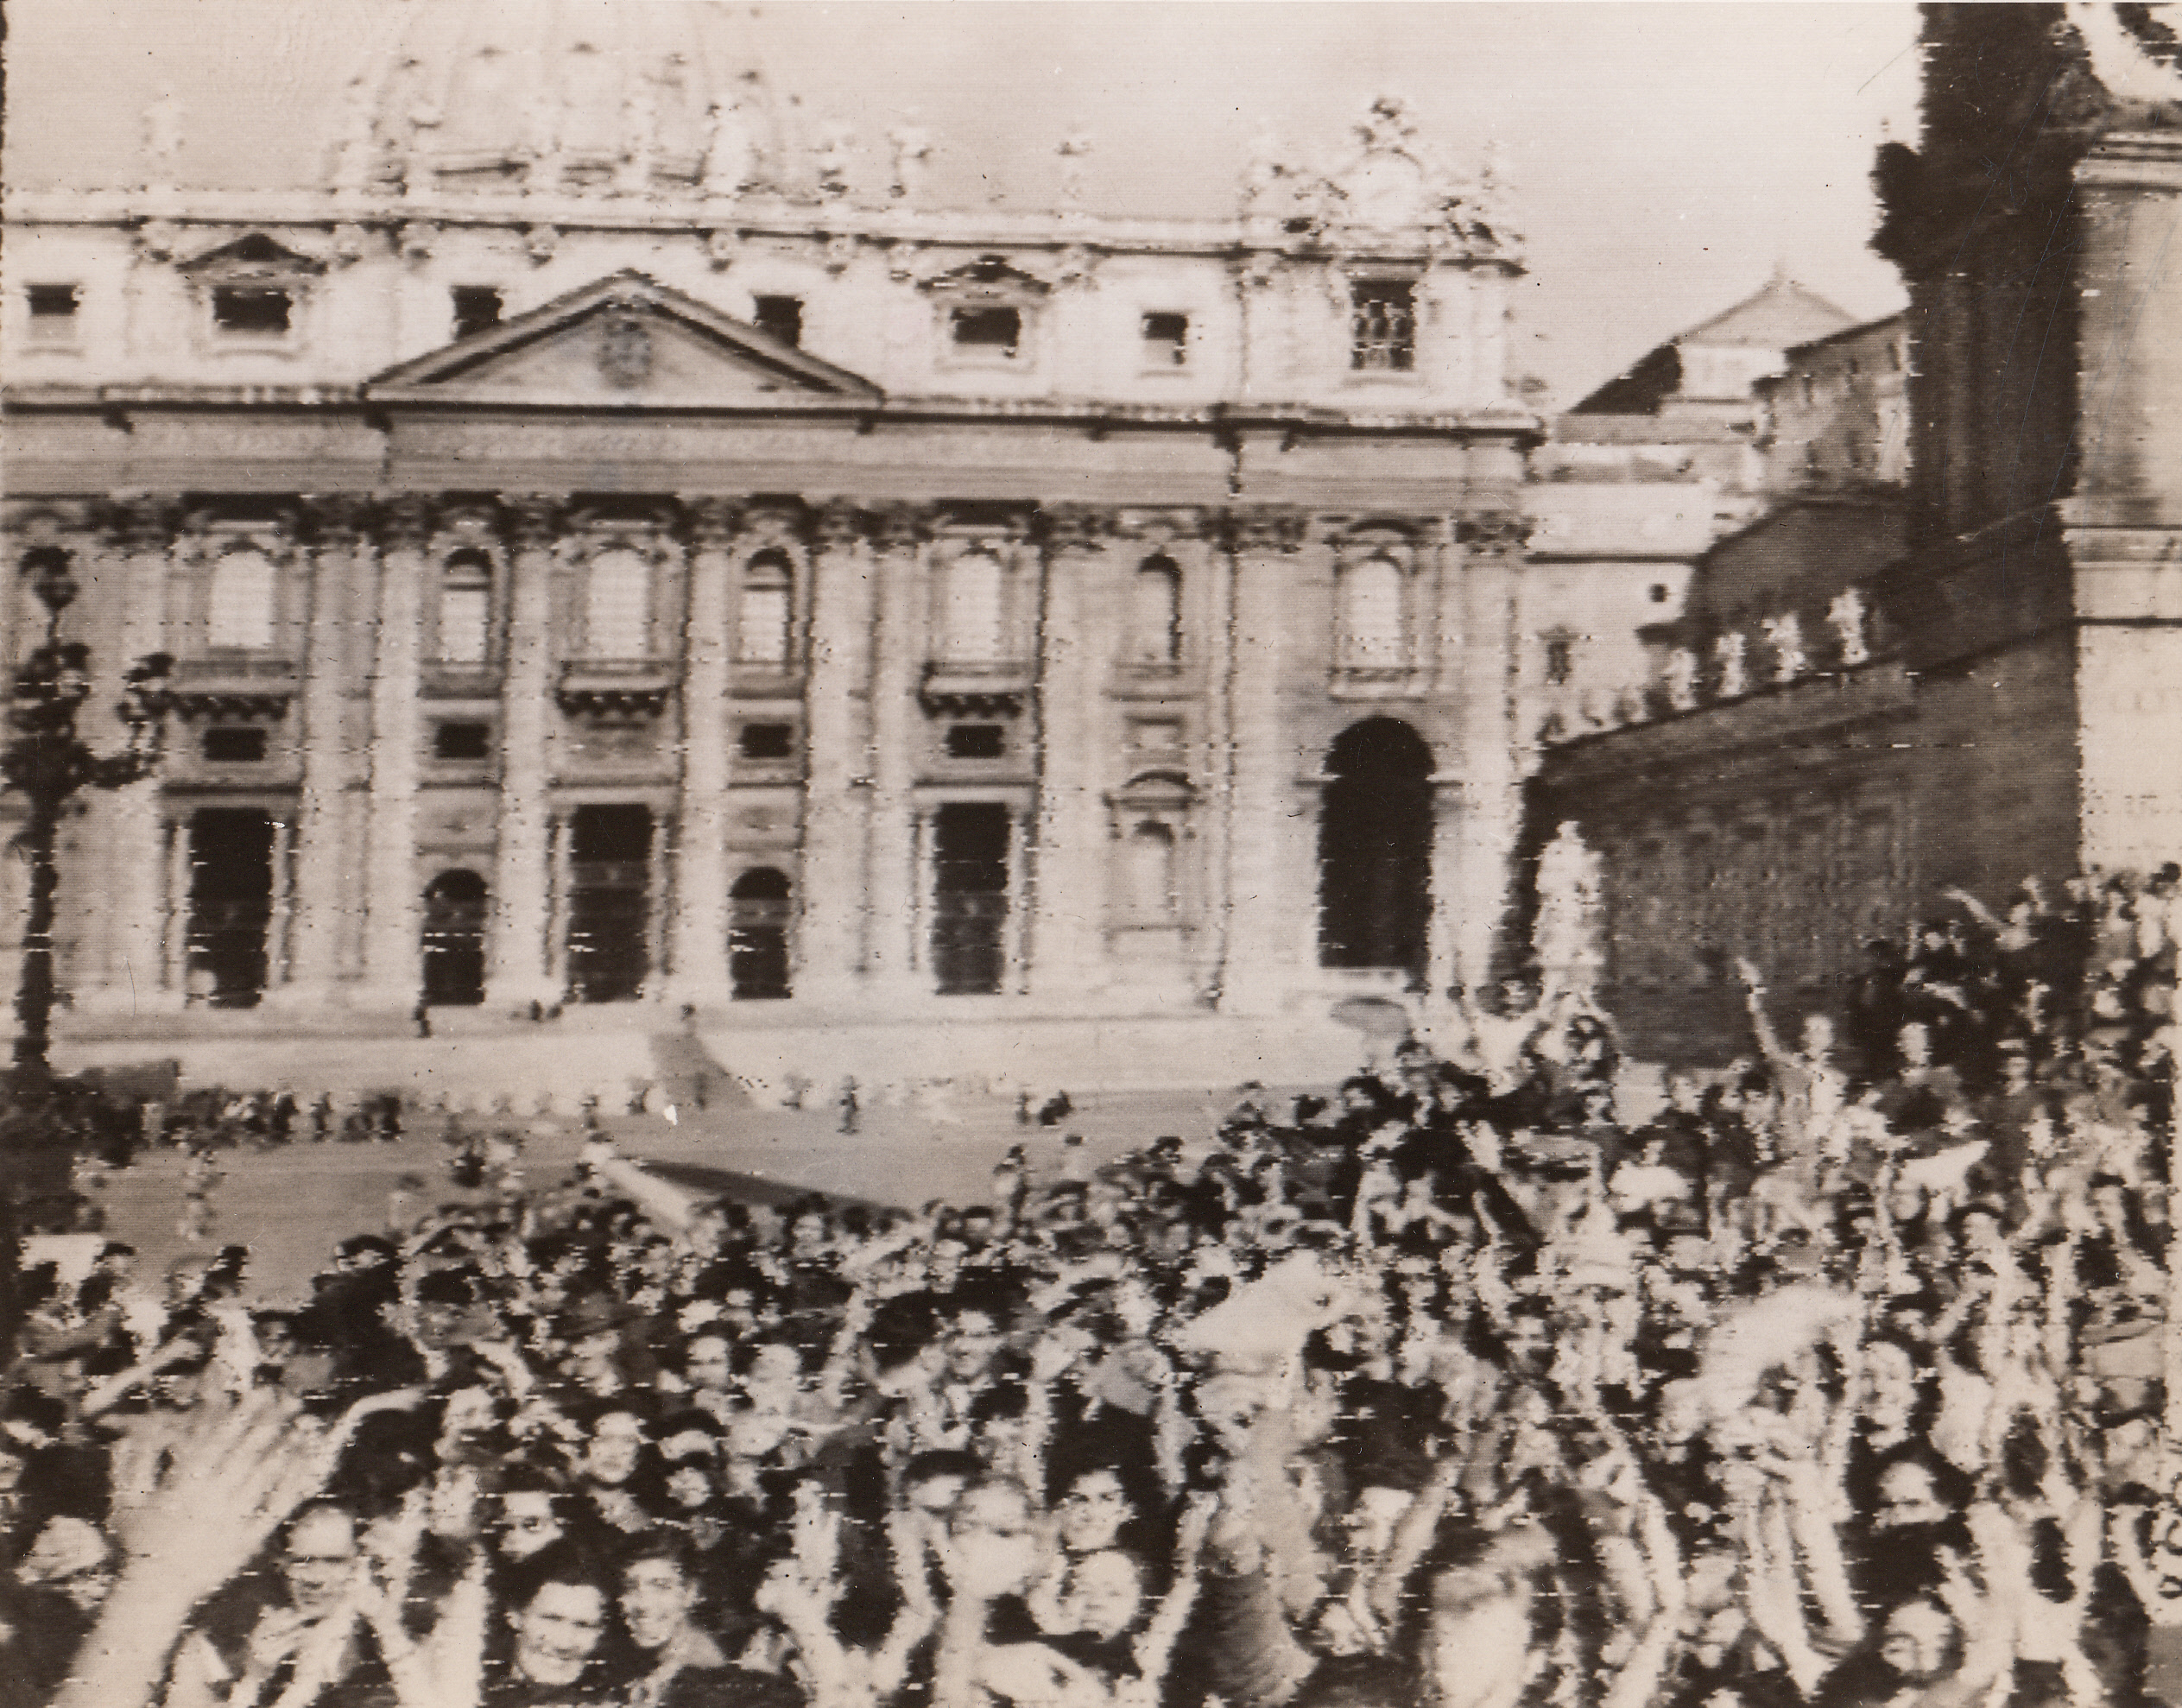 ITALIANS CHEER IN SHADOW OF CHURCH, 6/5/1944. VATICAN CITY—Jubilant Italians, gathering before historic old St. Peter’s Cathedral in Vatican City, wave and cheer wildly as Allied troops move triumphantly through the streets of Rome. Photo was made from an Army vehicle, which was completely hemmed in by joyous throngs.;